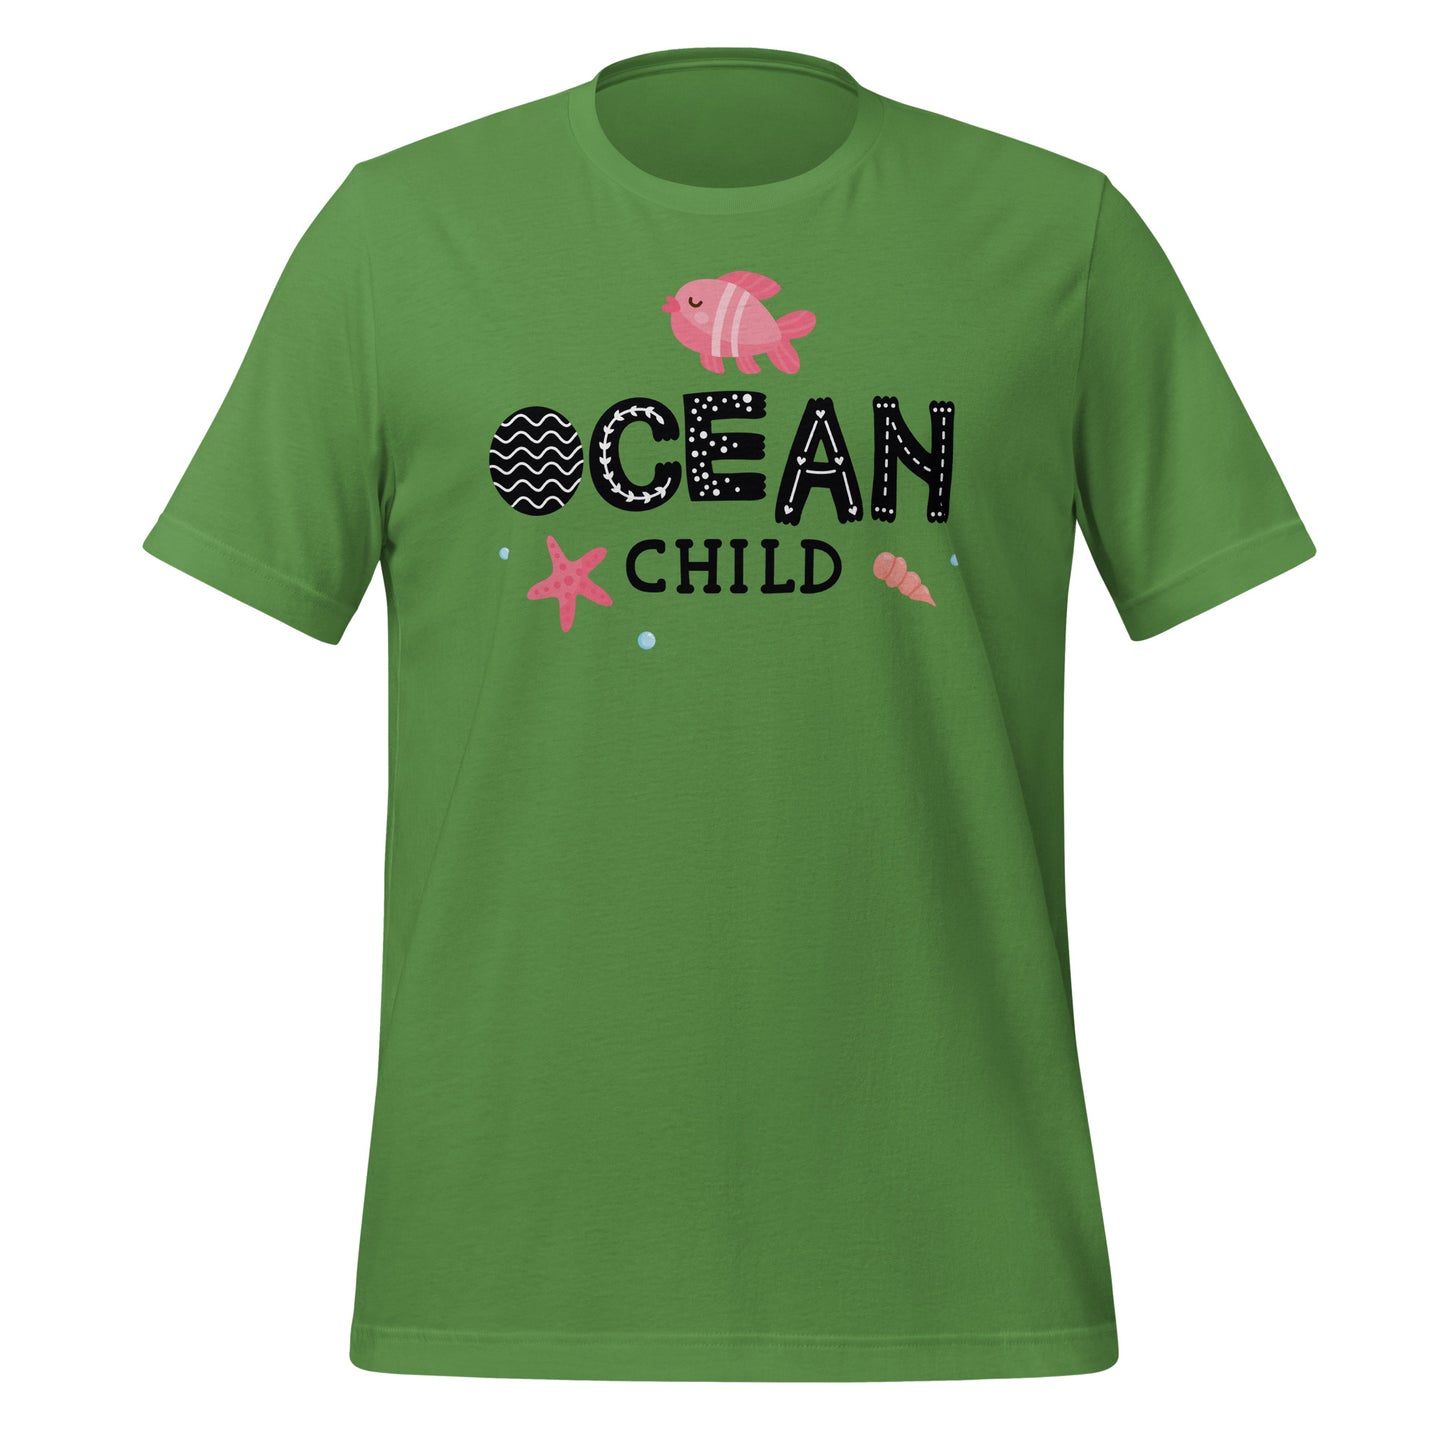 Ocean Child: Dive into Style with our Trendy T-shirt Collection!